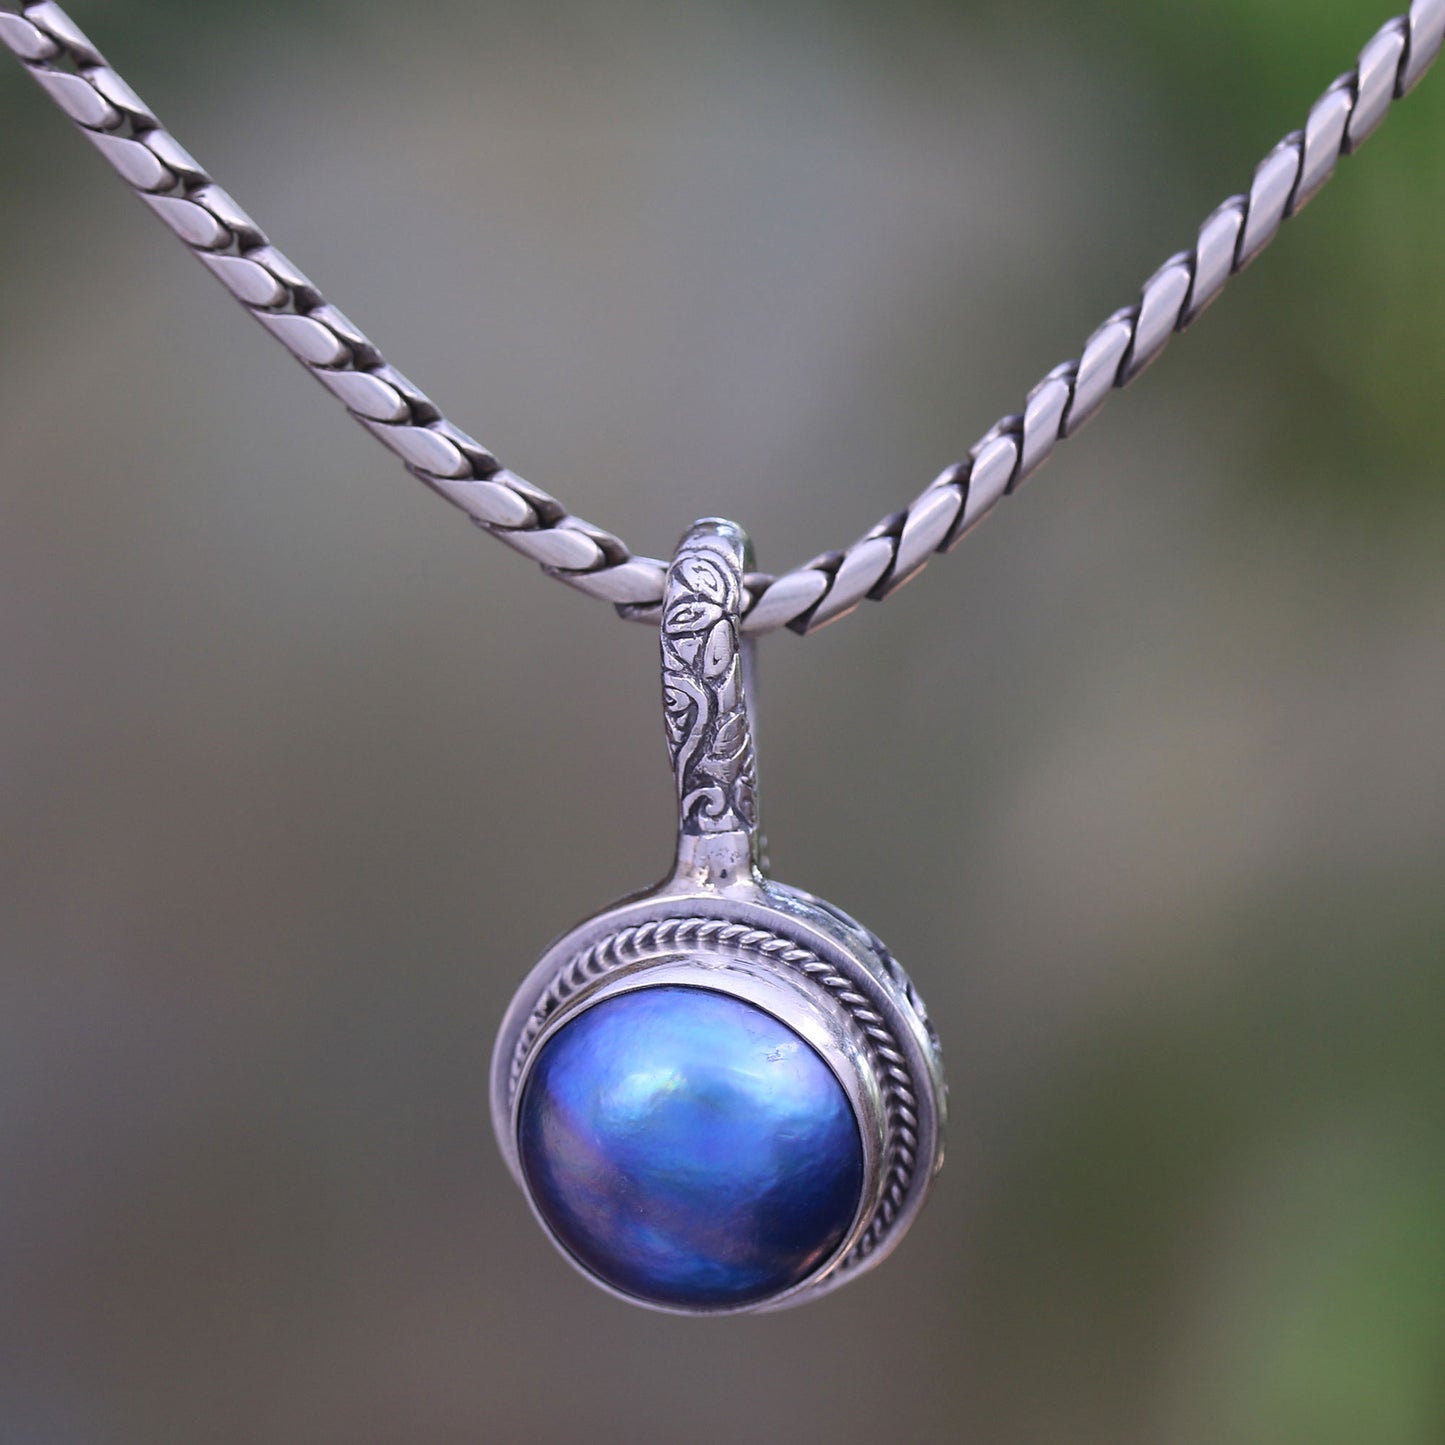 Round Luxury in Blue Blue Cultured Pearl Pendant Necklace from Bali